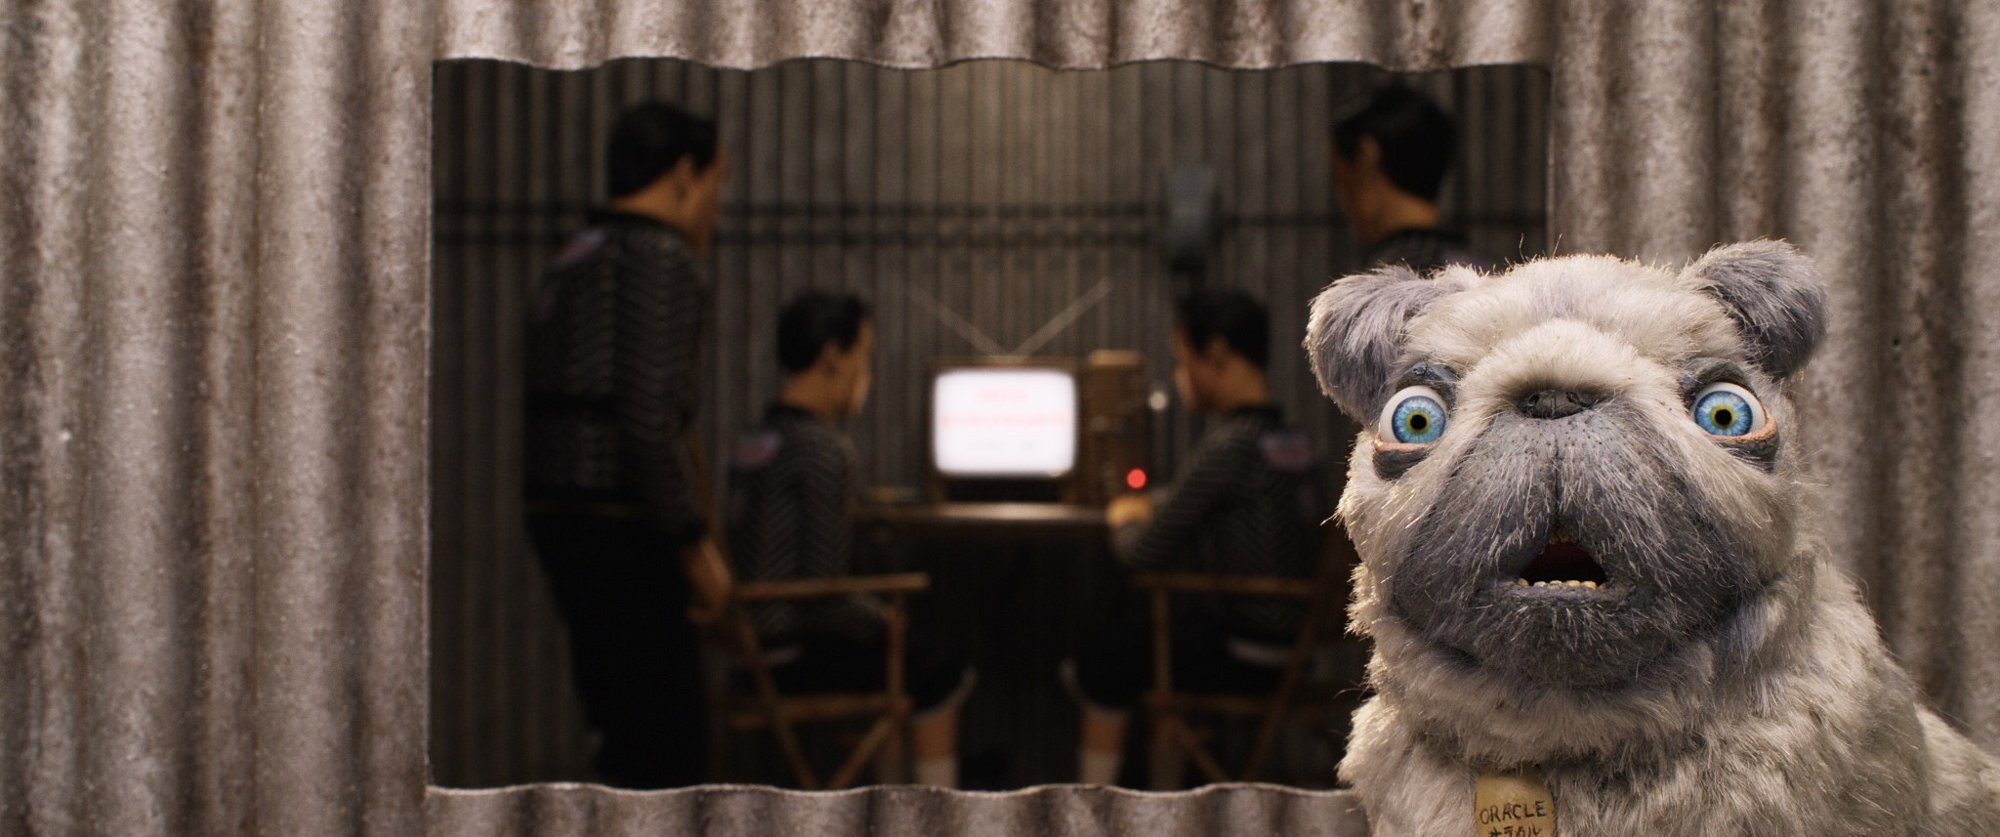 The Oracle Dog from Fox Searchlight Pictures' Isle of Dogs (2018)